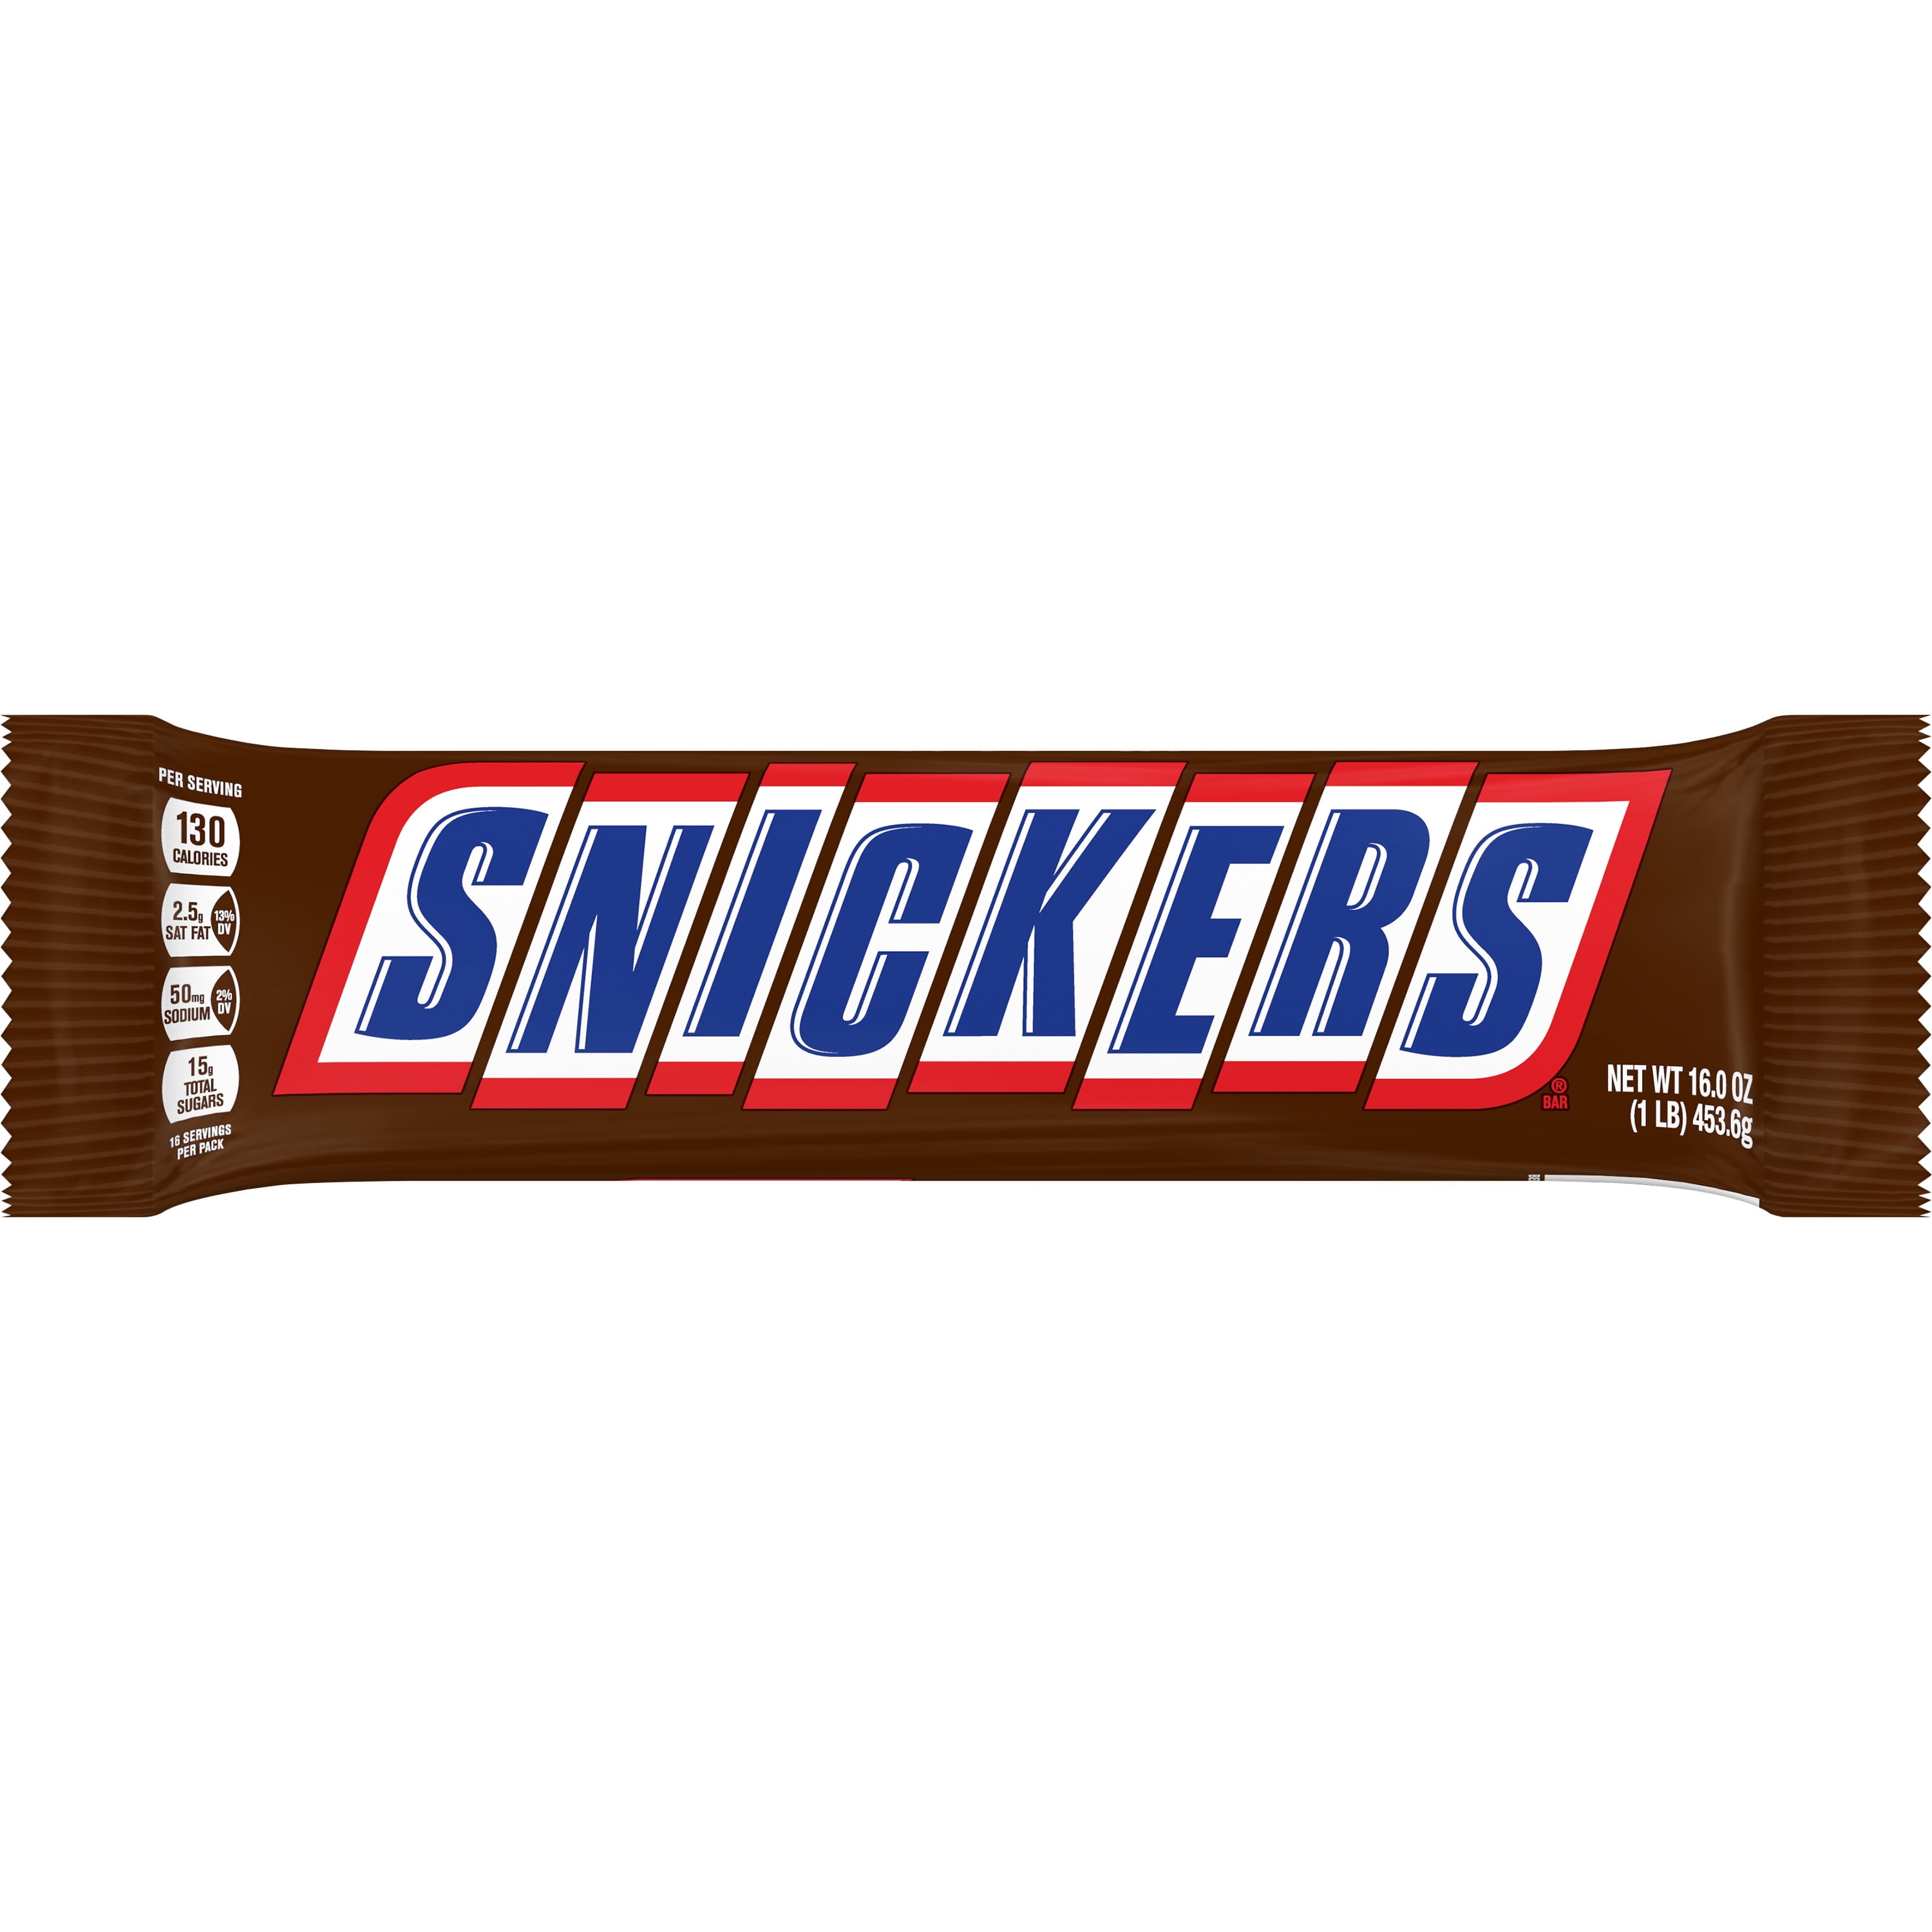 Snickers Christmas Chocolate Candy Bar, Giant Size - 16 oz Bar ...